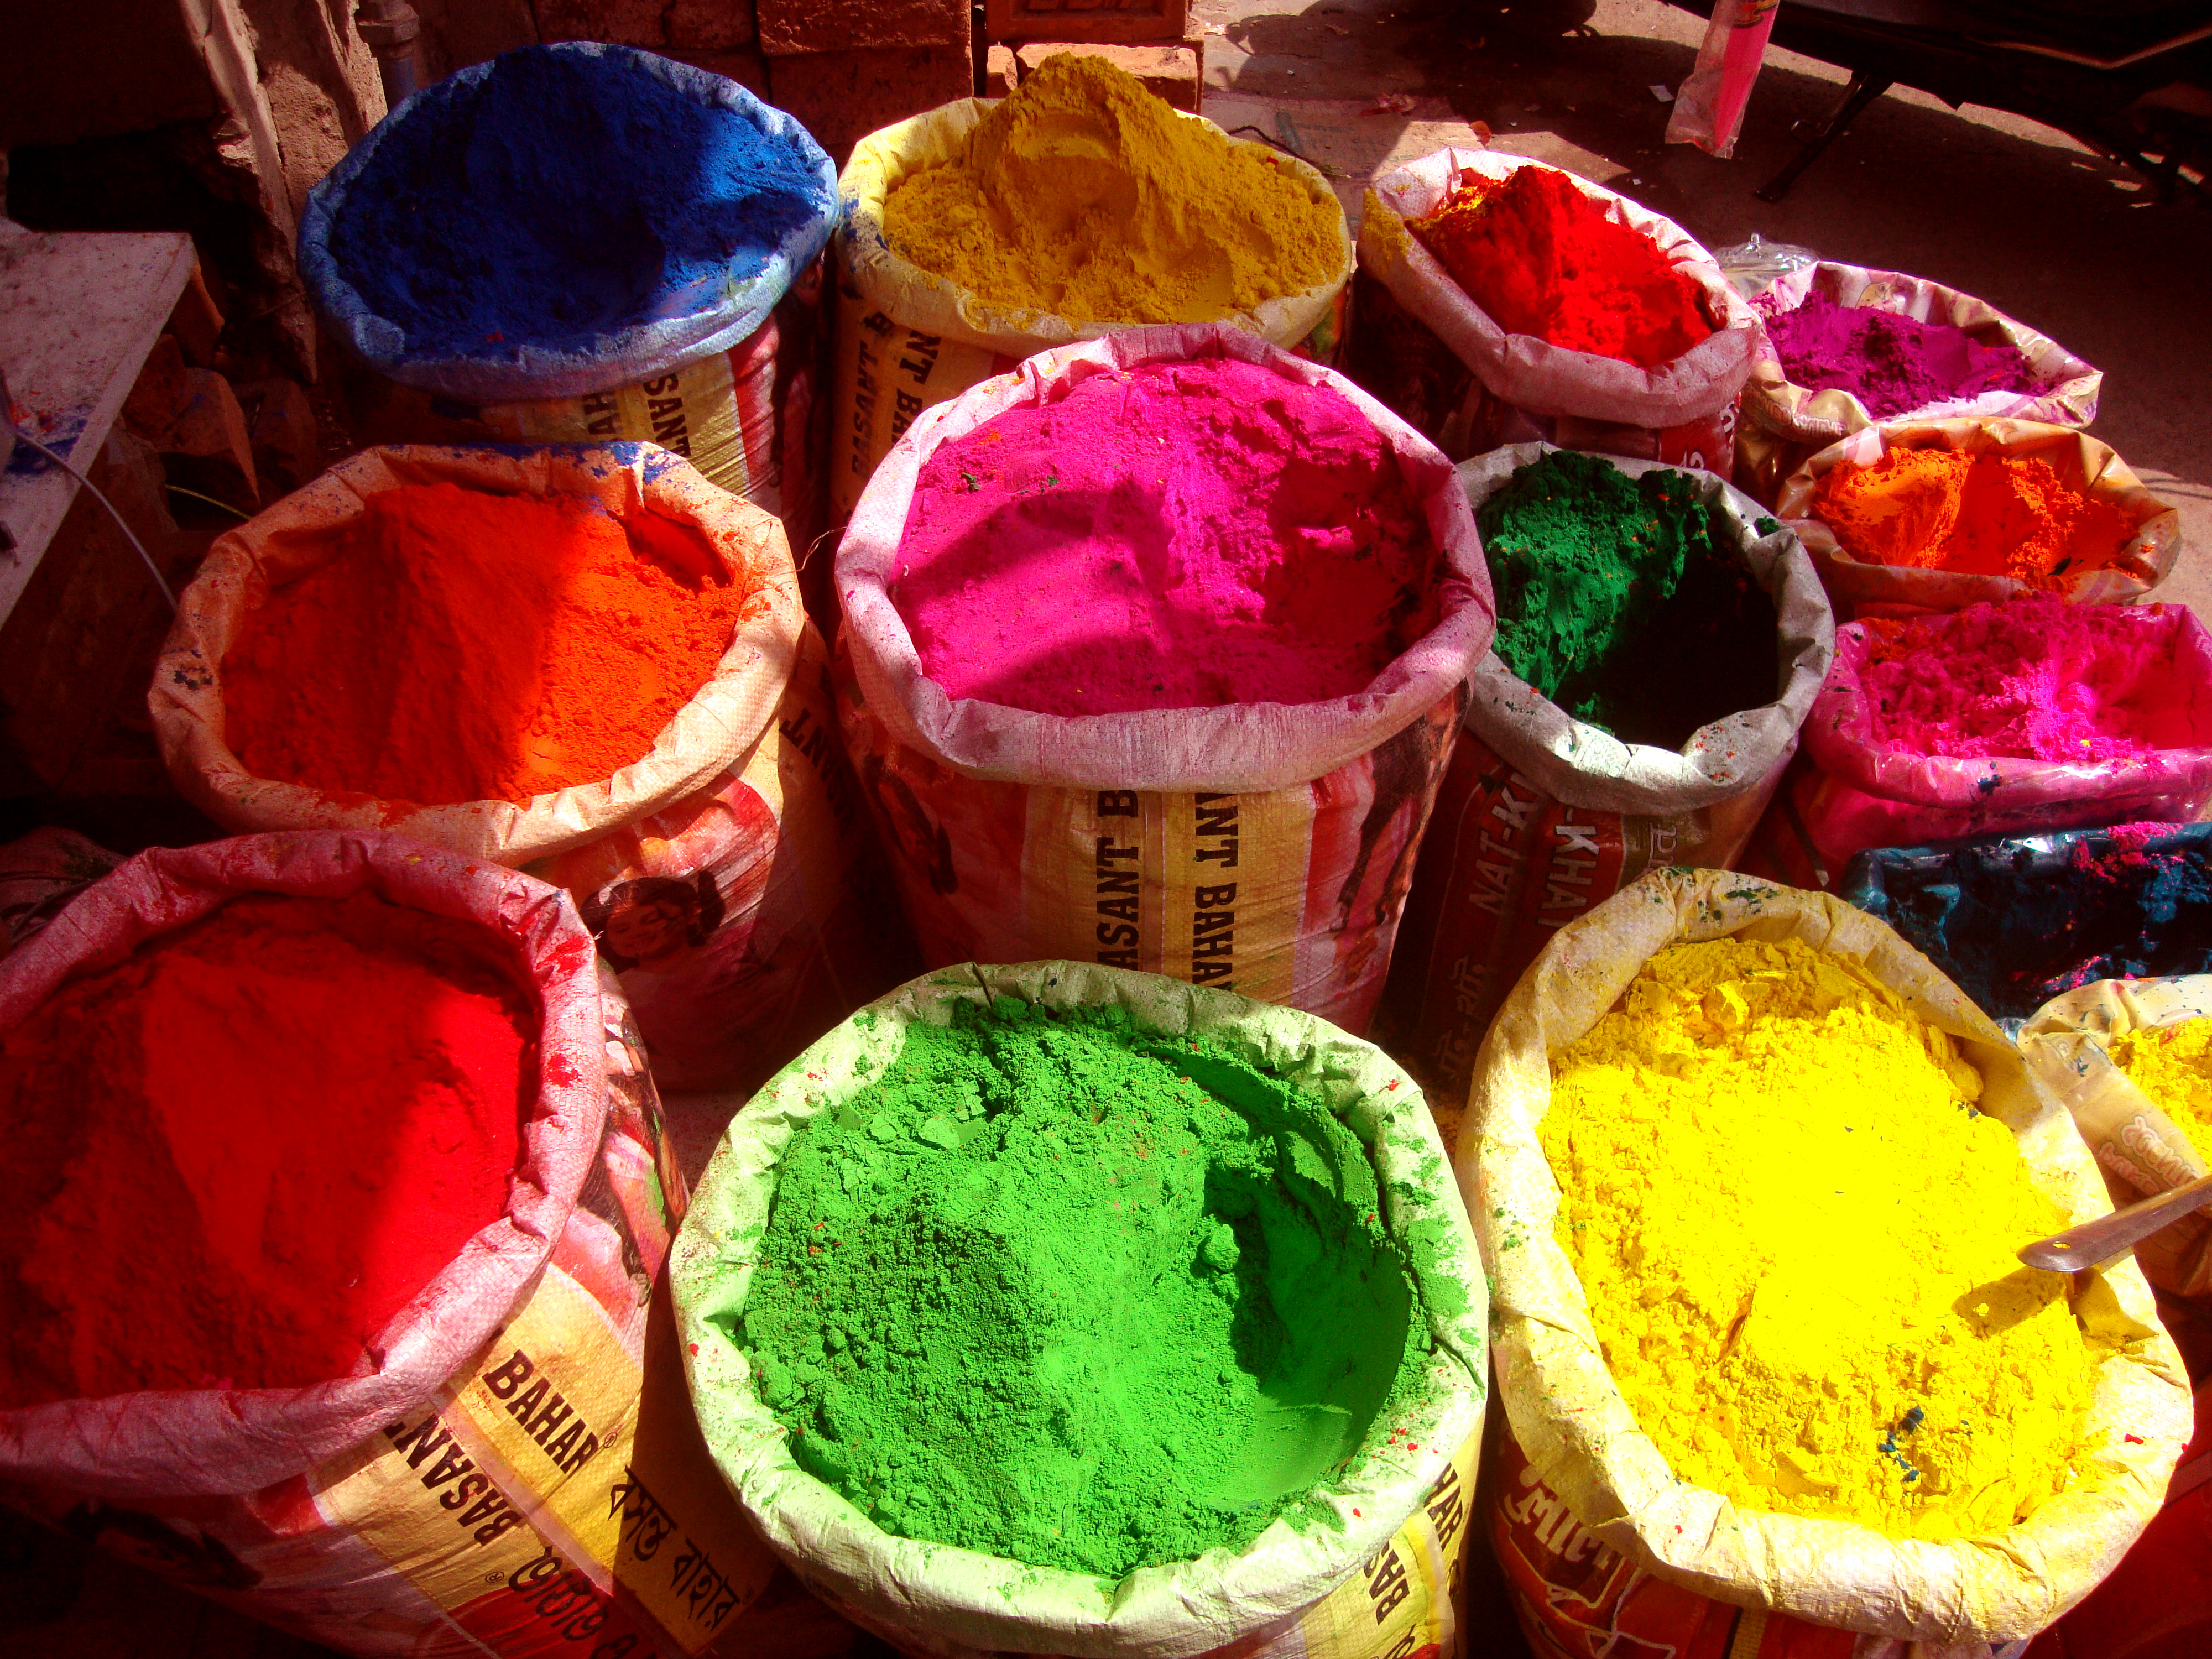 wallpapers holi, holiday, colors